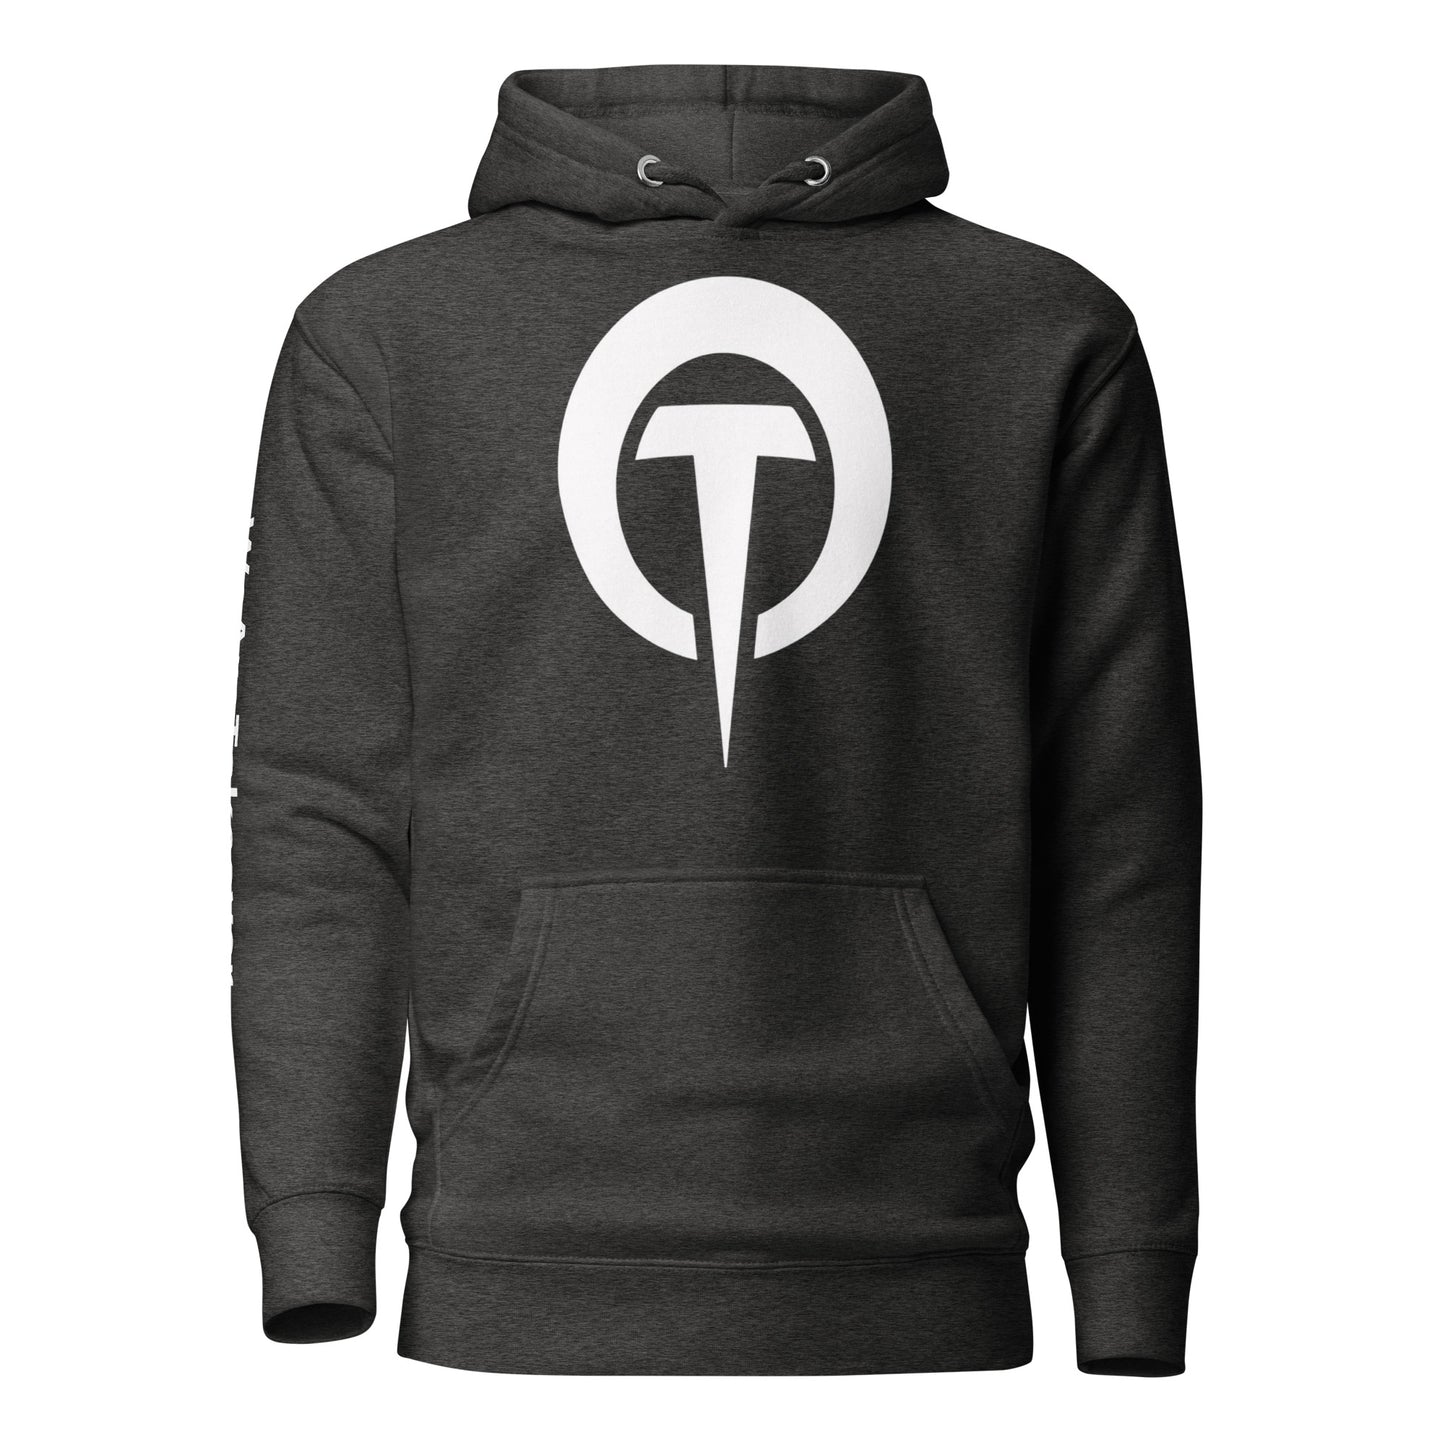 TAKEOVER Unisex Hoodie